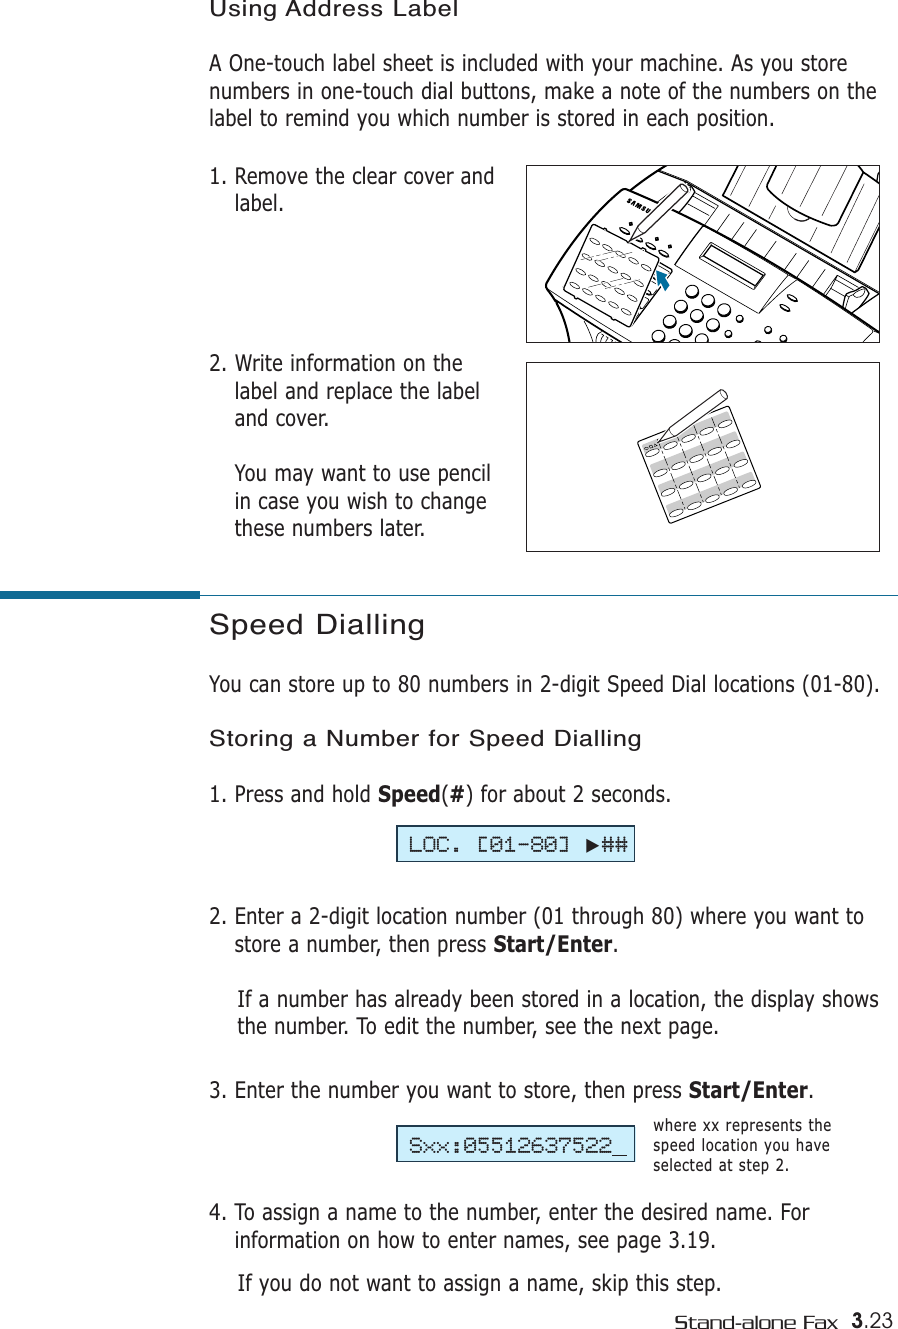 3.23Stand-alone FaxSpeed DiallingYou can store up to 80 numbers in 2-digit Speed Dial locations (01-80). Storing a Number for Speed Dialling1. Press and hold Speed(#) for about 2 seconds. 2. Enter a 2-digit location number (01 through 80) where you want tostore a number, then press Start/Enter.If a number has already been stored in a location, the display showsthe number. To edit the number, see the next page.3. Enter the number you want to store, then press Start/Enter.4. To assign a name to the number, enter the desired name. Forinformation on how to enter names, see page 3.19.If you do not want to assign a name, skip this step. where xx represents thespeed location you haveselected at step 2.LOC. [01-80]❿##Sxx:05512637522Using Address LabelA One-touch label sheet is included with your machine. As you storenumbers in one-touch dial buttons, make a note of the numbers on thelabel to remind you which number is stored in each position.1. Remove the clear cover andlabel. 2. Write information on thelabel and replace the labeland cover. You may want to use pencilin case you wish to changethese numbers later.